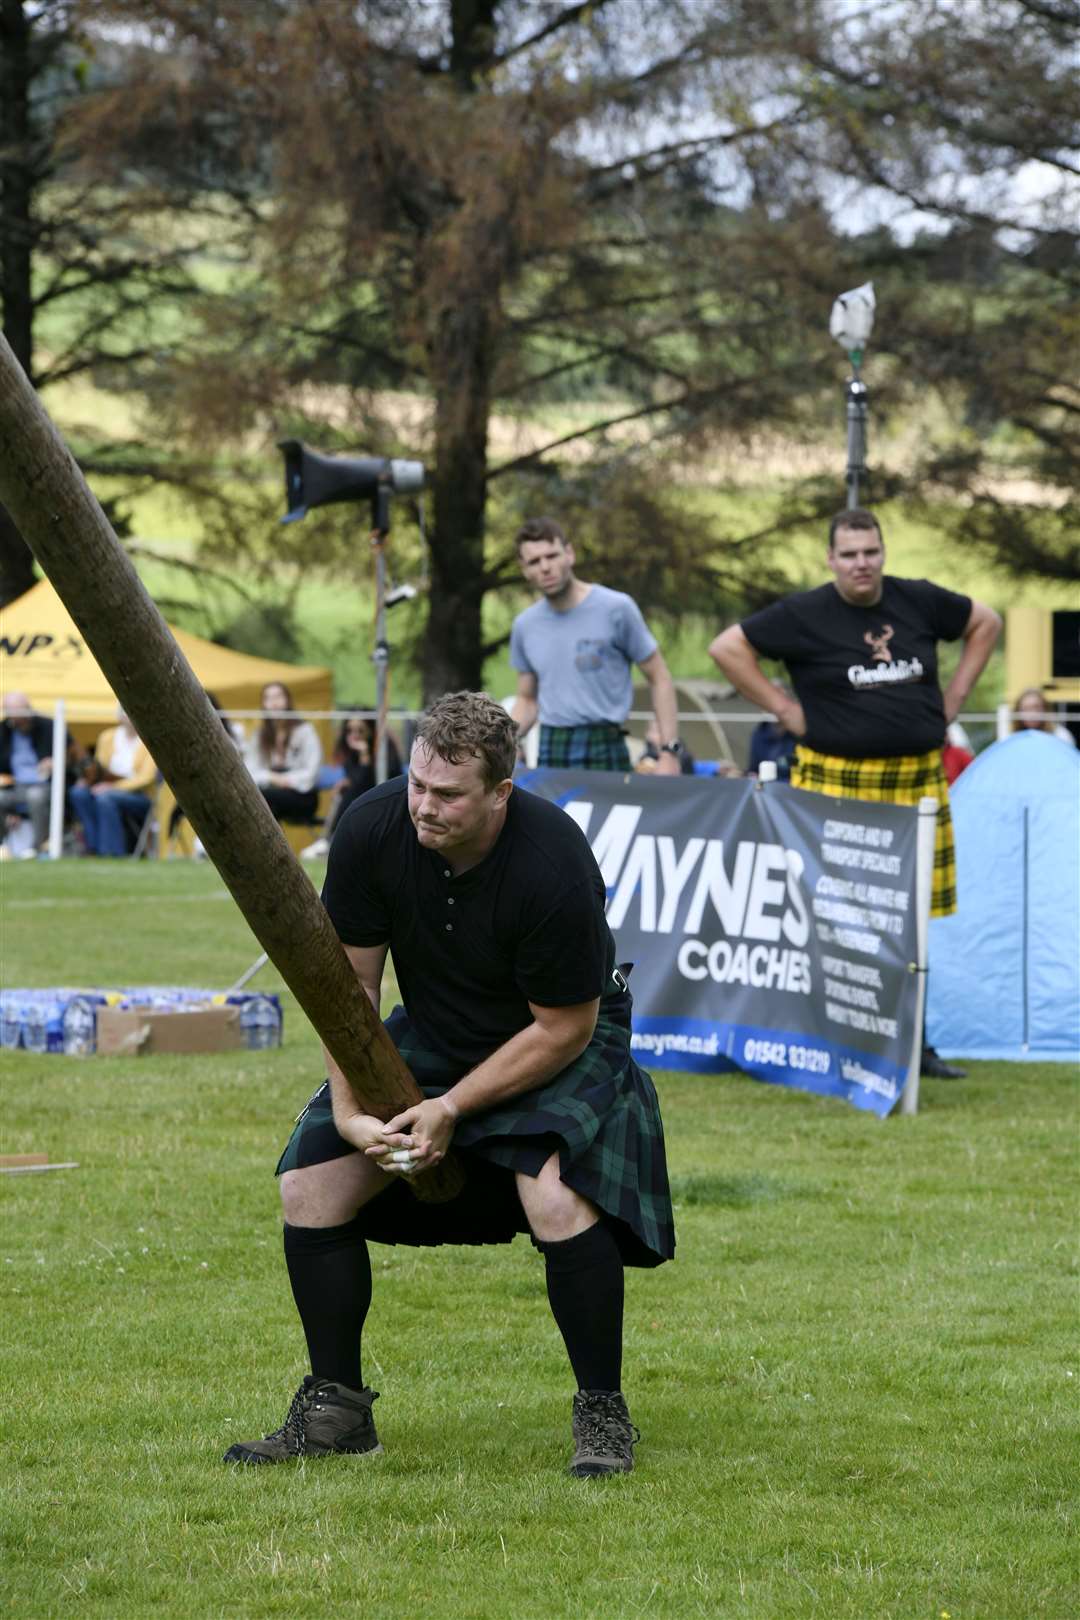 Canadian Nick Reynard competing in the Caber toss. Picture: Beth Taylor